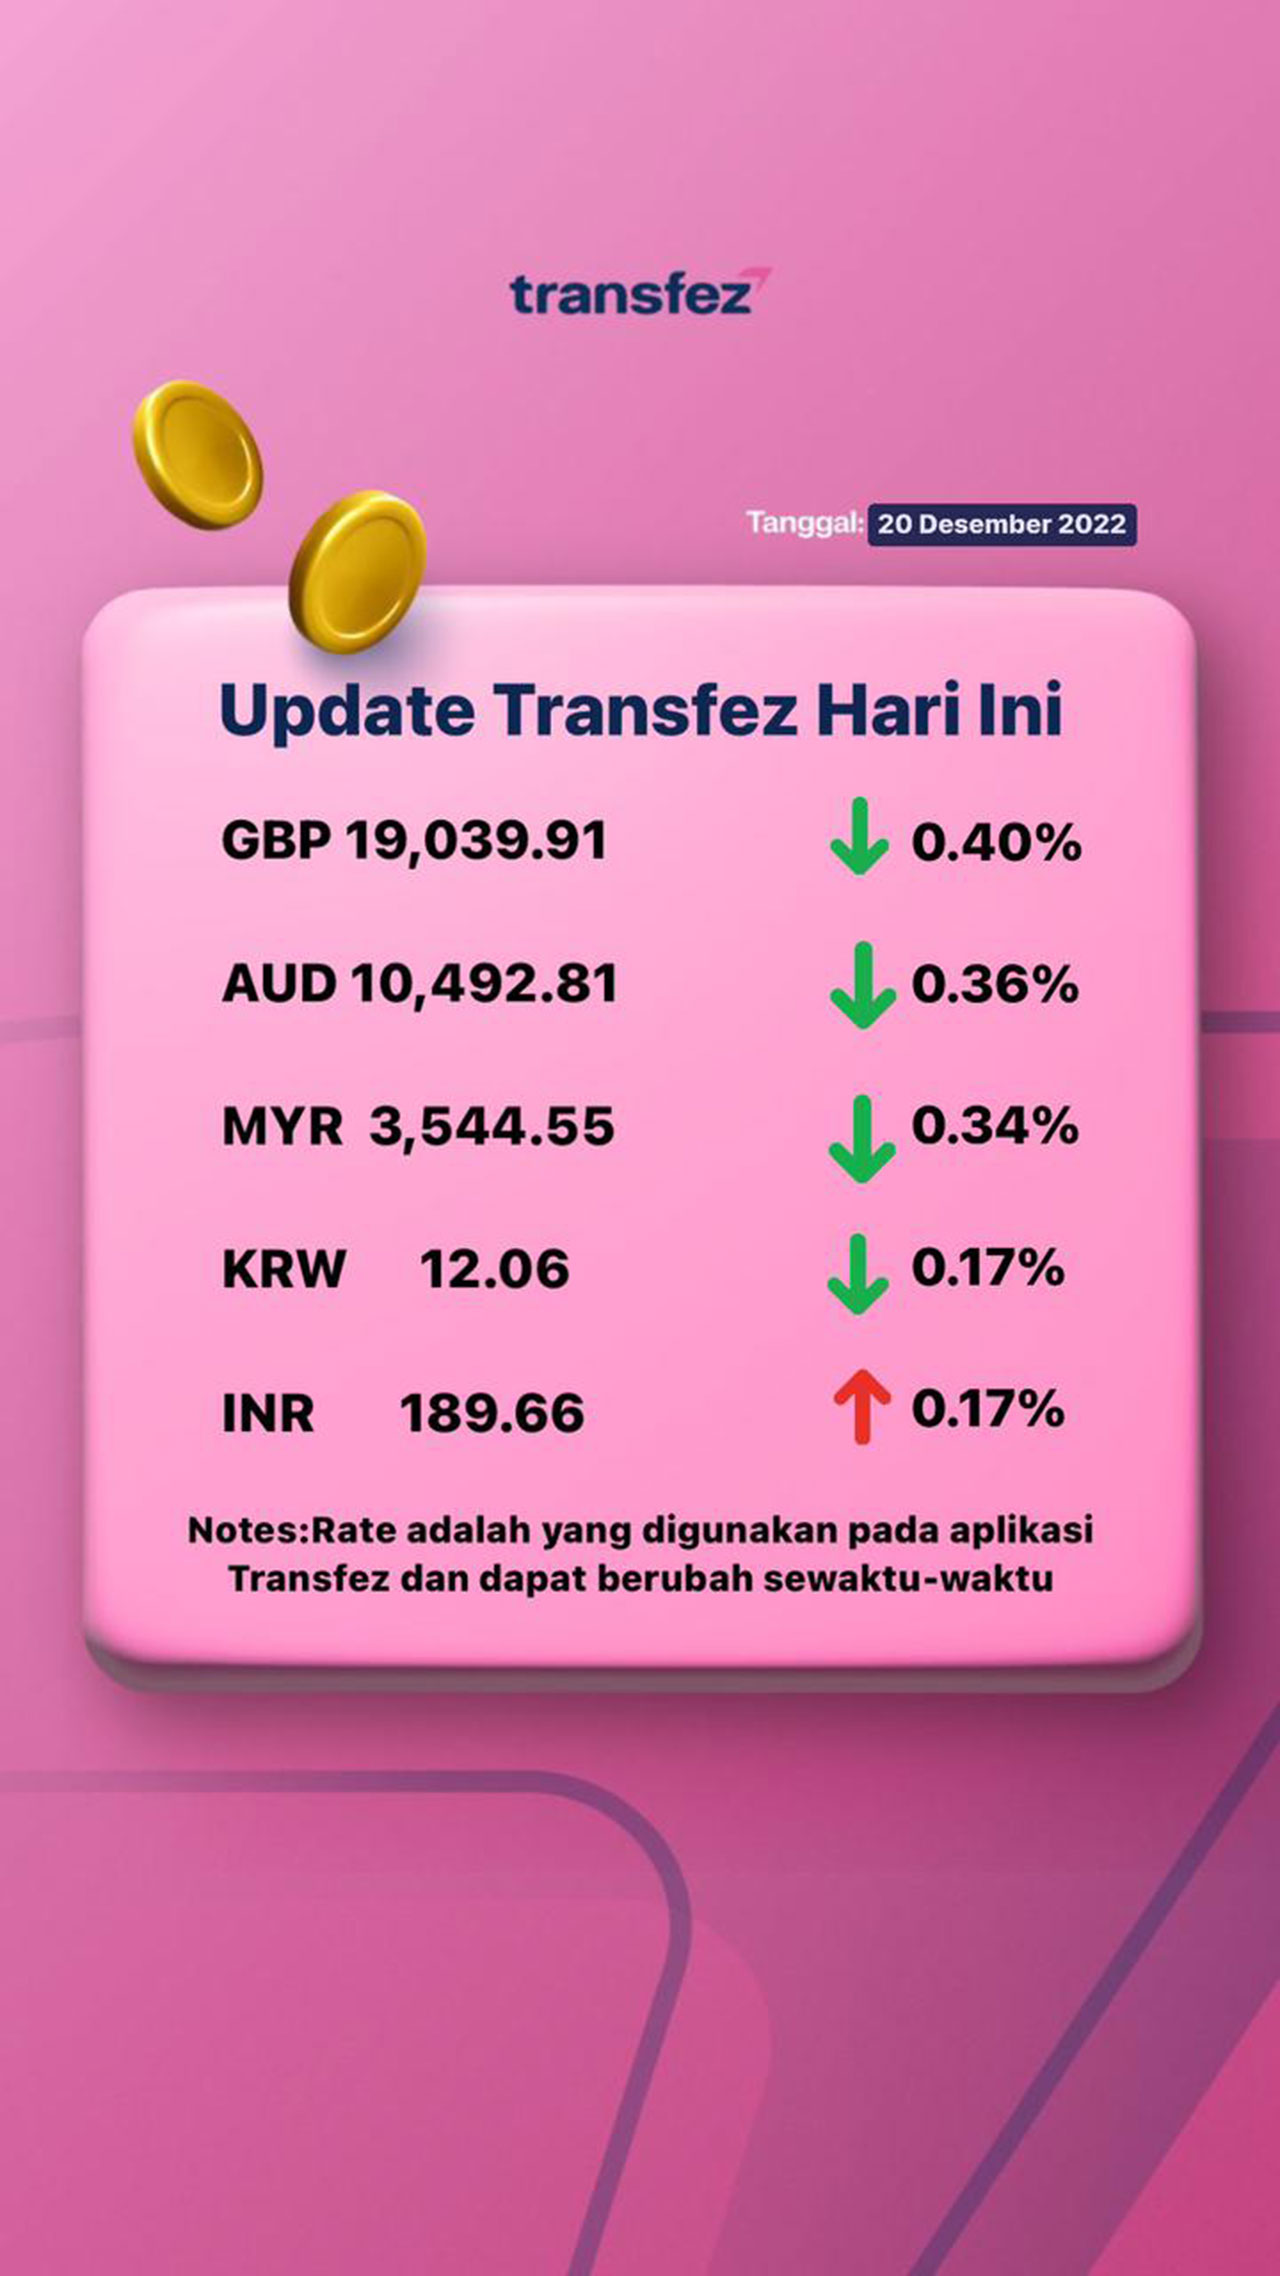 Today's Transfez Rate Update 20 December 2022